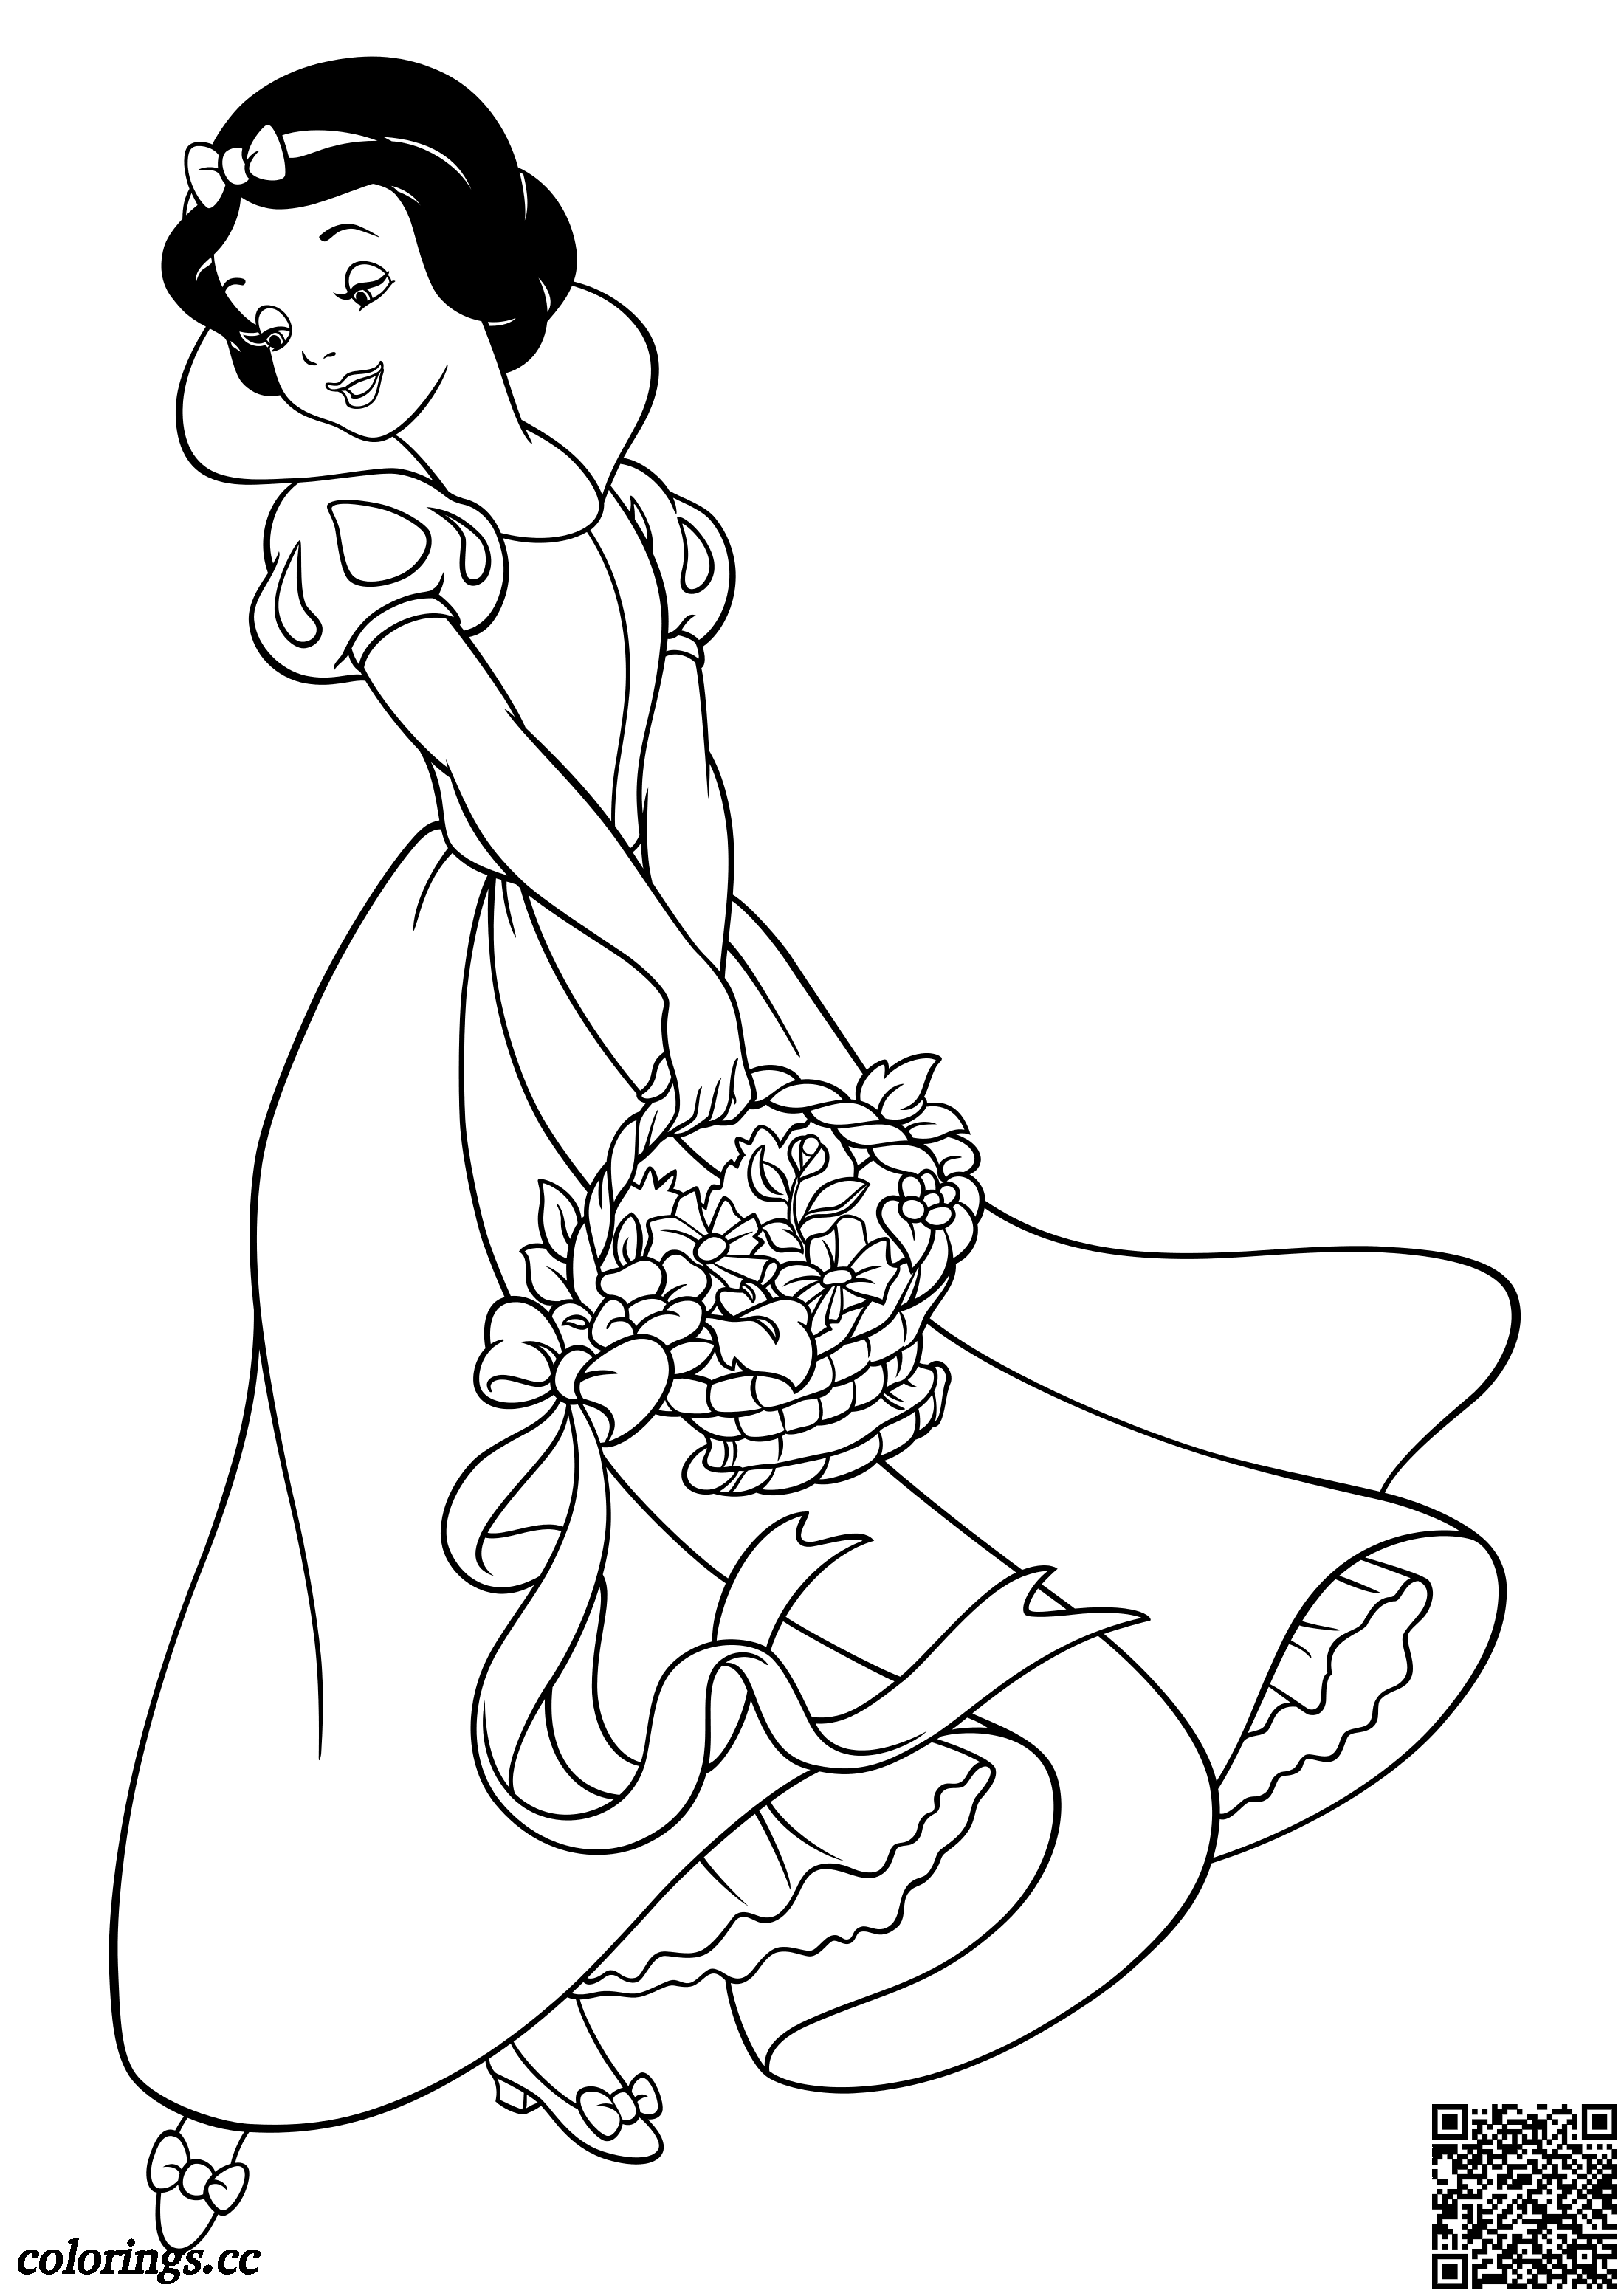 Snow White With A Basket Of Flowers Coloring Pages, Snow White And The  Seven Dwarfs Coloring Pages - Colorings.cc